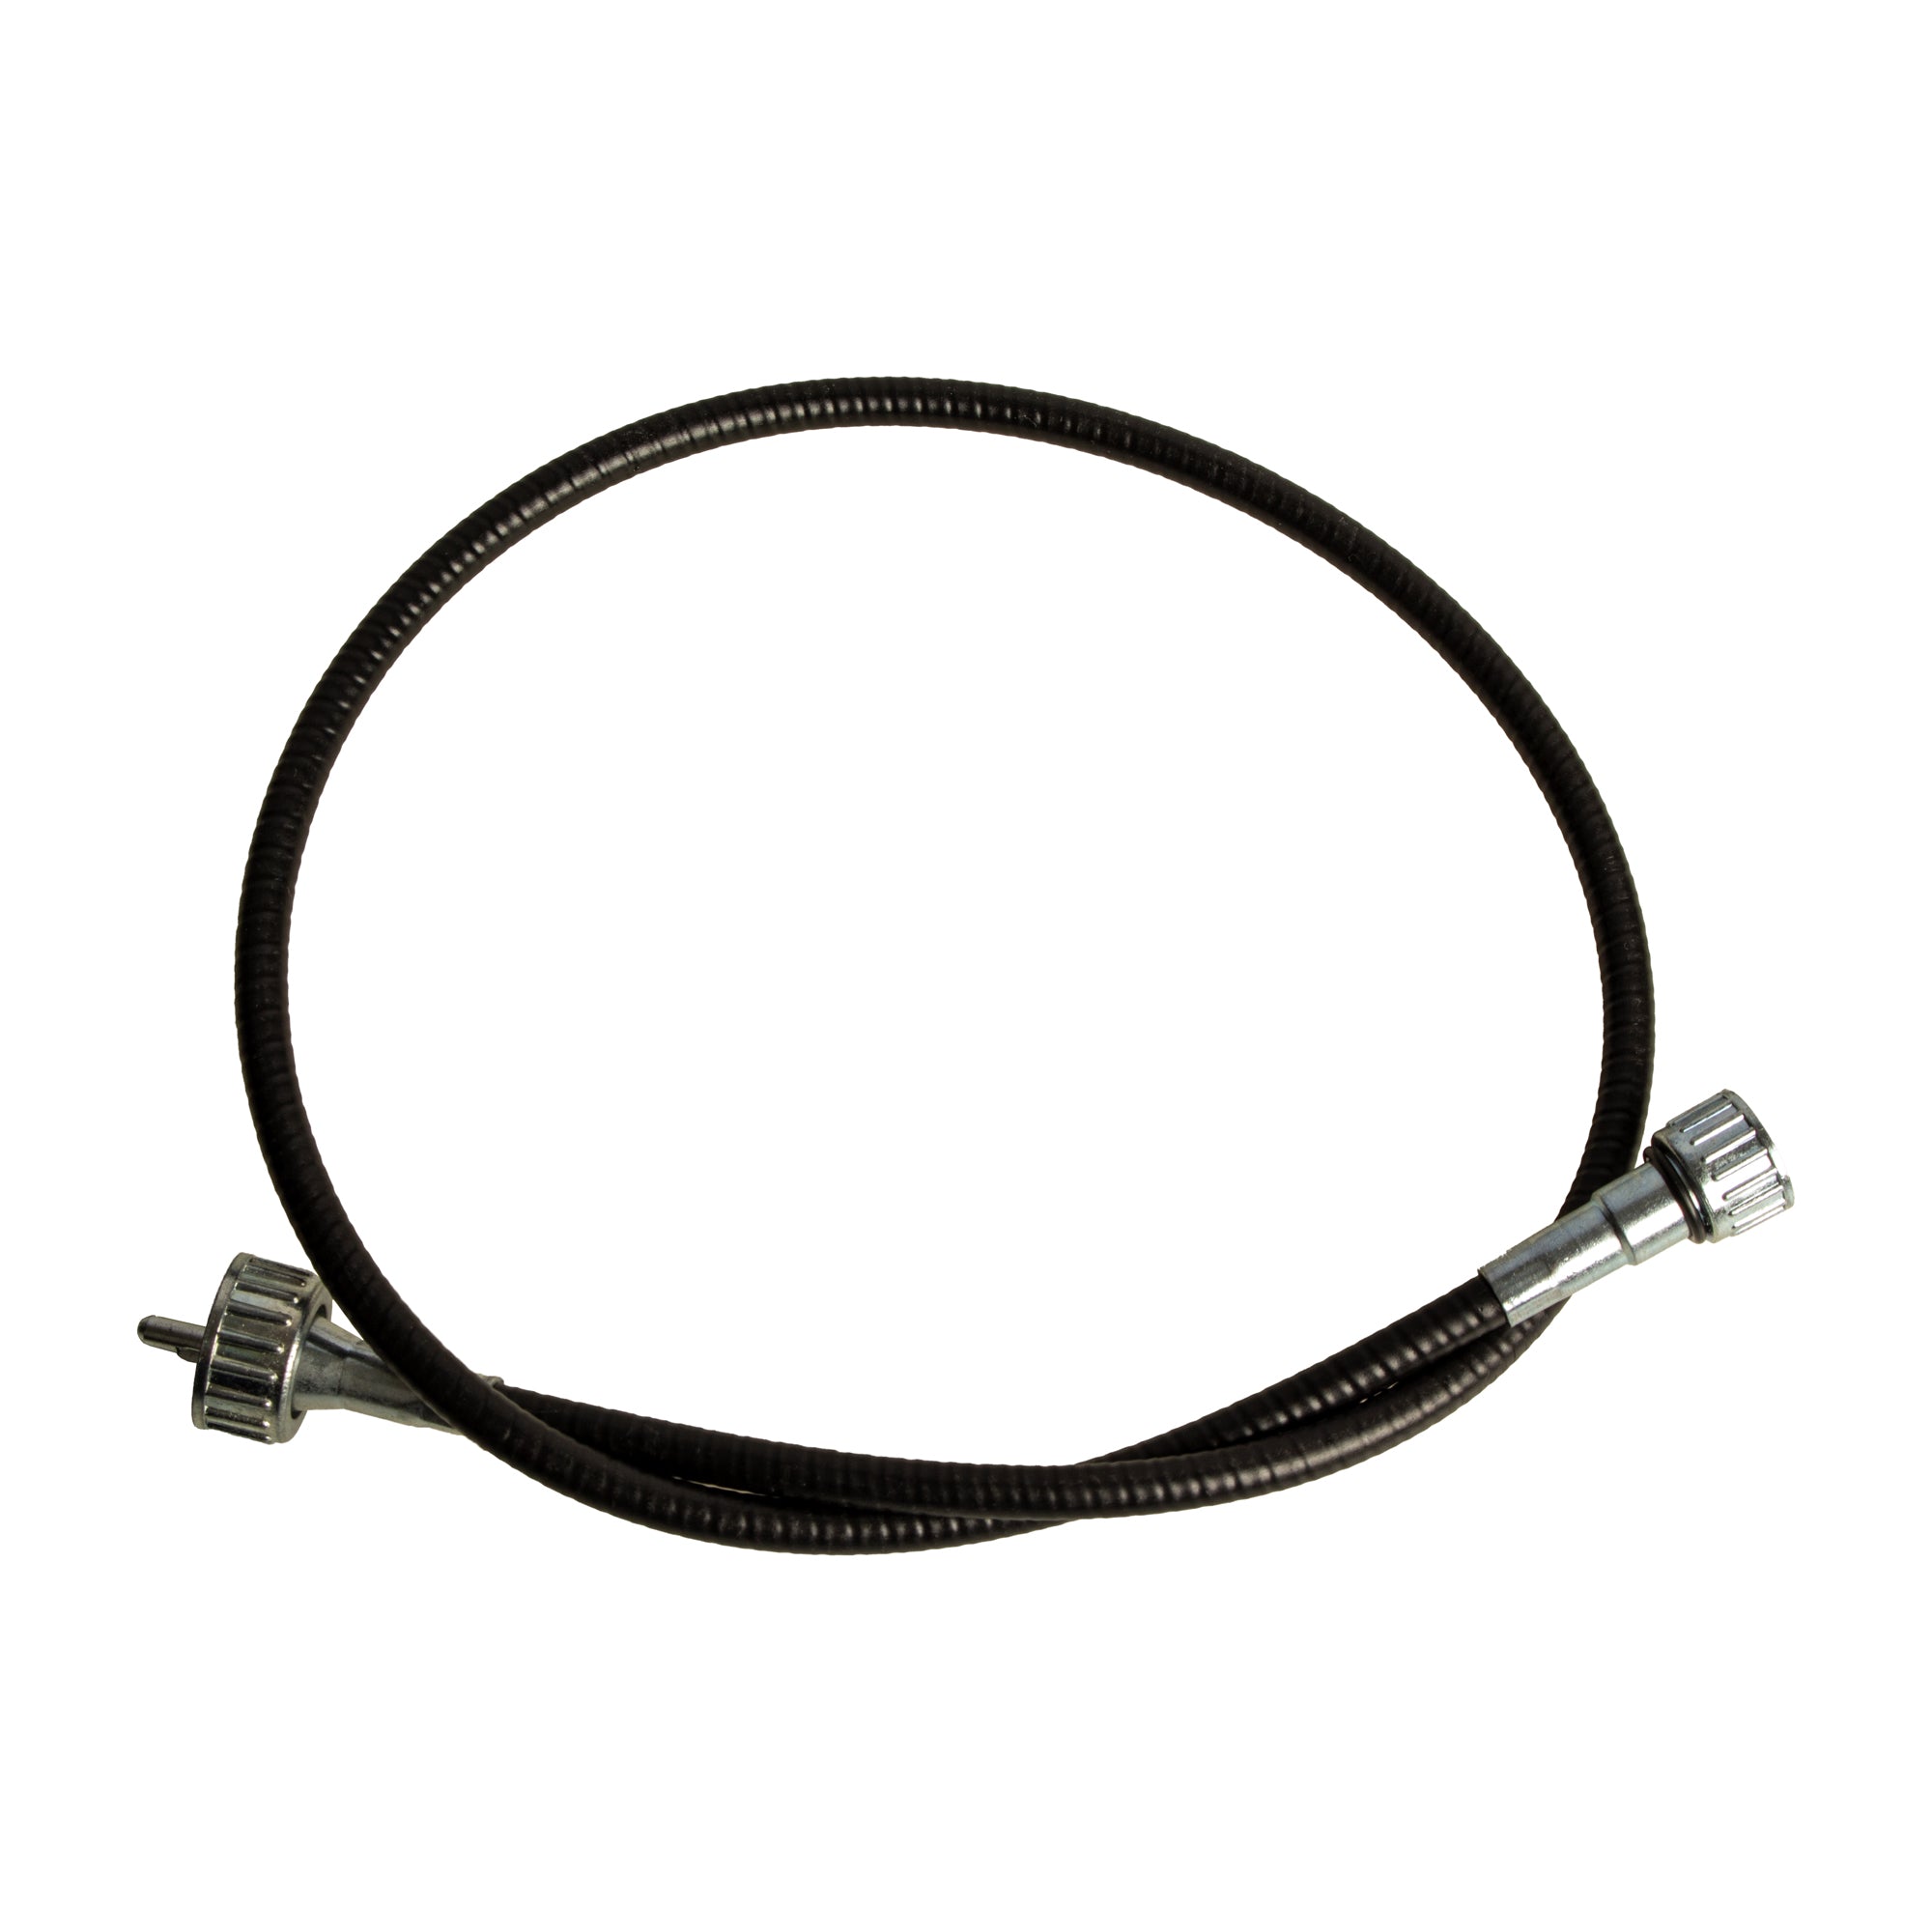 Tachometer Cable Replacement for JOHN DEERE 4020 4400 4520 500 500A 600 AR26721